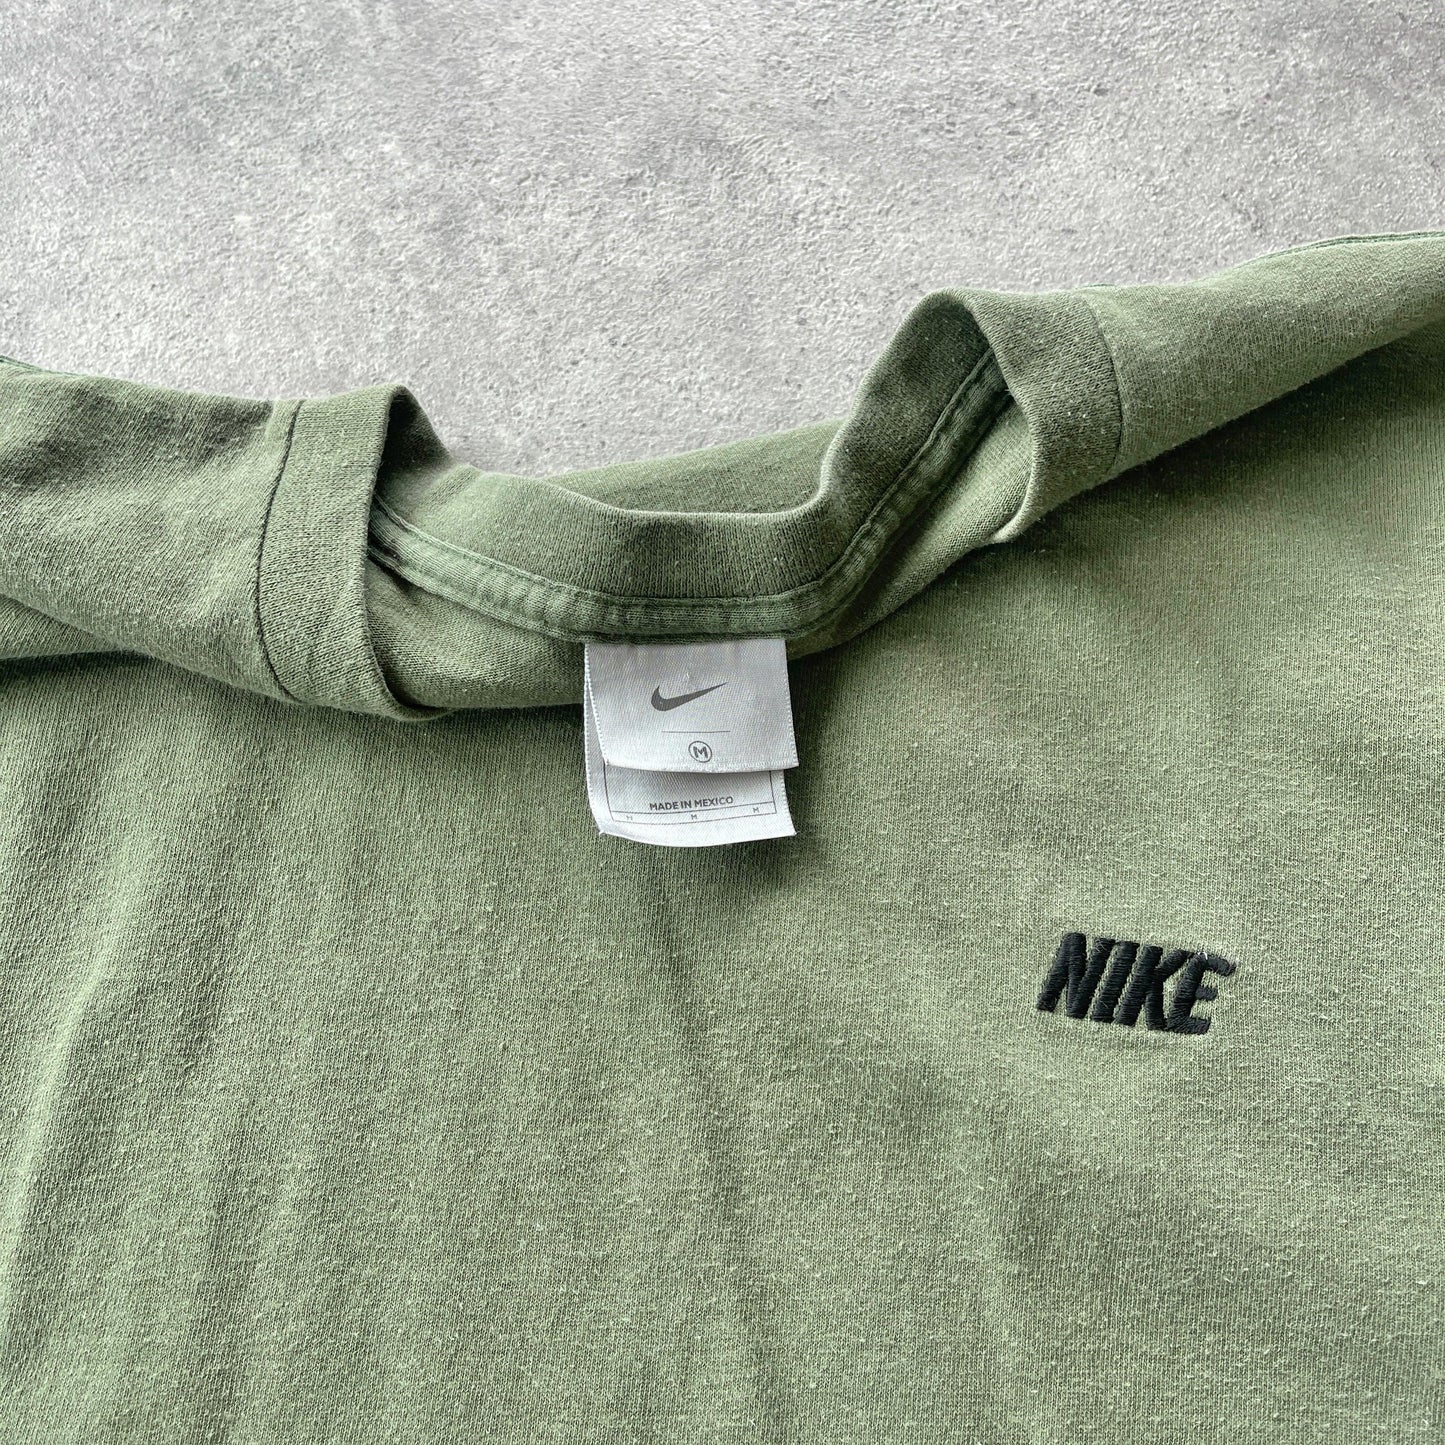 Nike RARE 2000s embroidered spellout t-shirt (M)